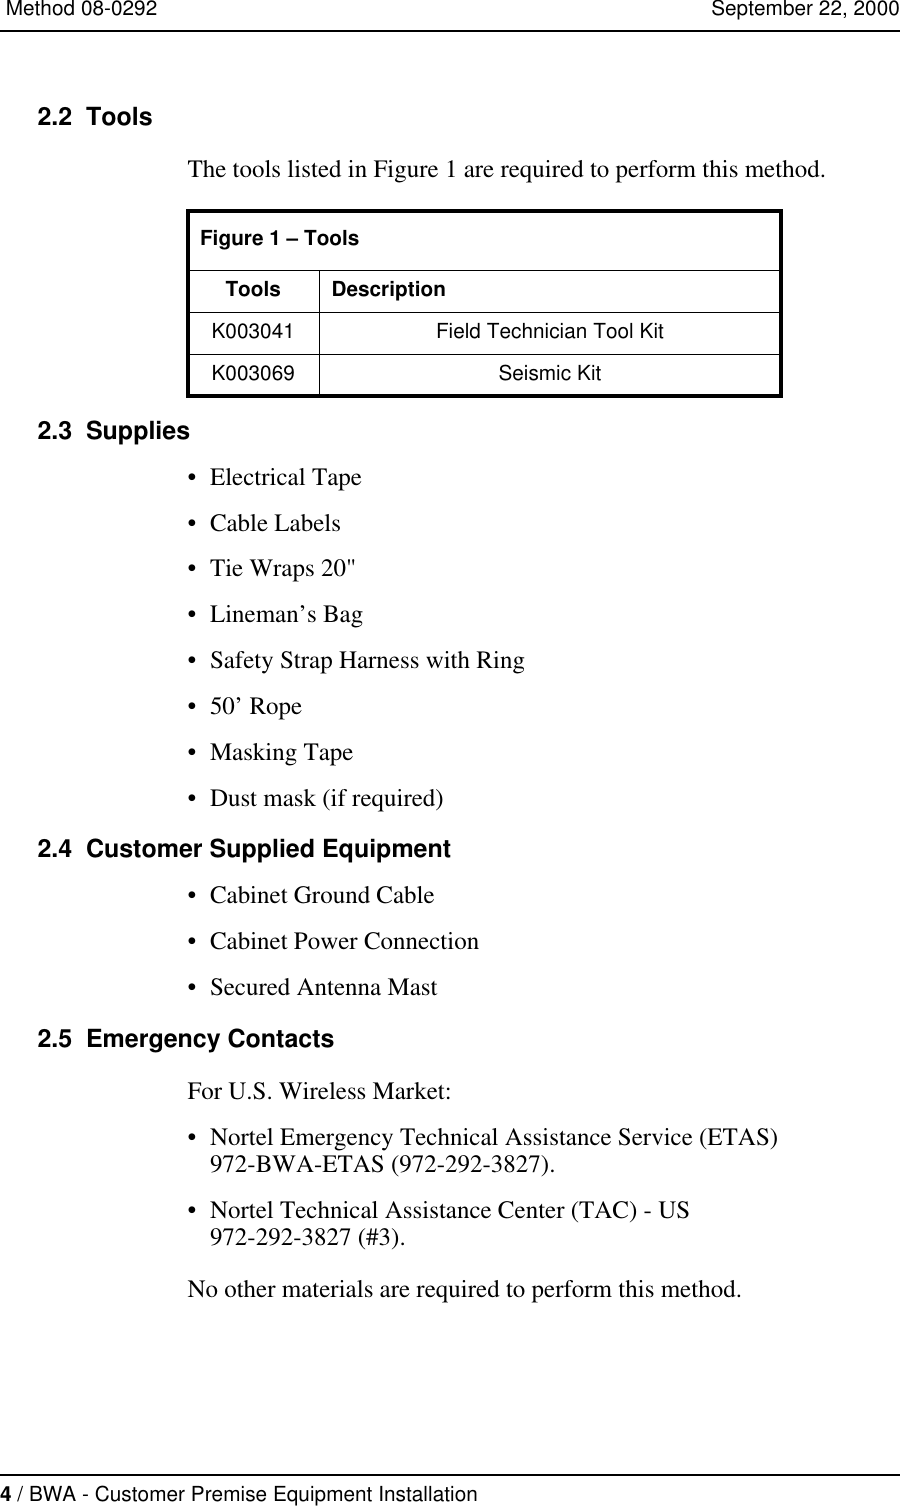 4 / BWA - Customer Premise Equipment Installation   Method 08-0292   September 22, 20002.2  ToolsThe tools listed in Figure 1 are required to perform this method. 2.3  Supplies•Electrical Tape•Cable Labels•Tie Wraps 20&quot;•Lineman’s Bag•Safety Strap Harness with Ring•50’ Rope•Masking Tape•Dust mask (if required)2.4  Customer Supplied Equipment•Cabinet Ground Cable•Cabinet Power Connection•Secured Antenna Mast2.5  Emergency ContactsFor U.S. Wireless Market:•Nortel Emergency Technical Assistance Service (ETAS)972-BWA-ETAS (972-292-3827).•Nortel Technical Assistance Center (TAC) - US972-292-3827 (#3).No other materials are required to perform this method.Figure 1 – ToolsTools DescriptionK003041 Field Technician Tool KitK003069 Seismic Kit